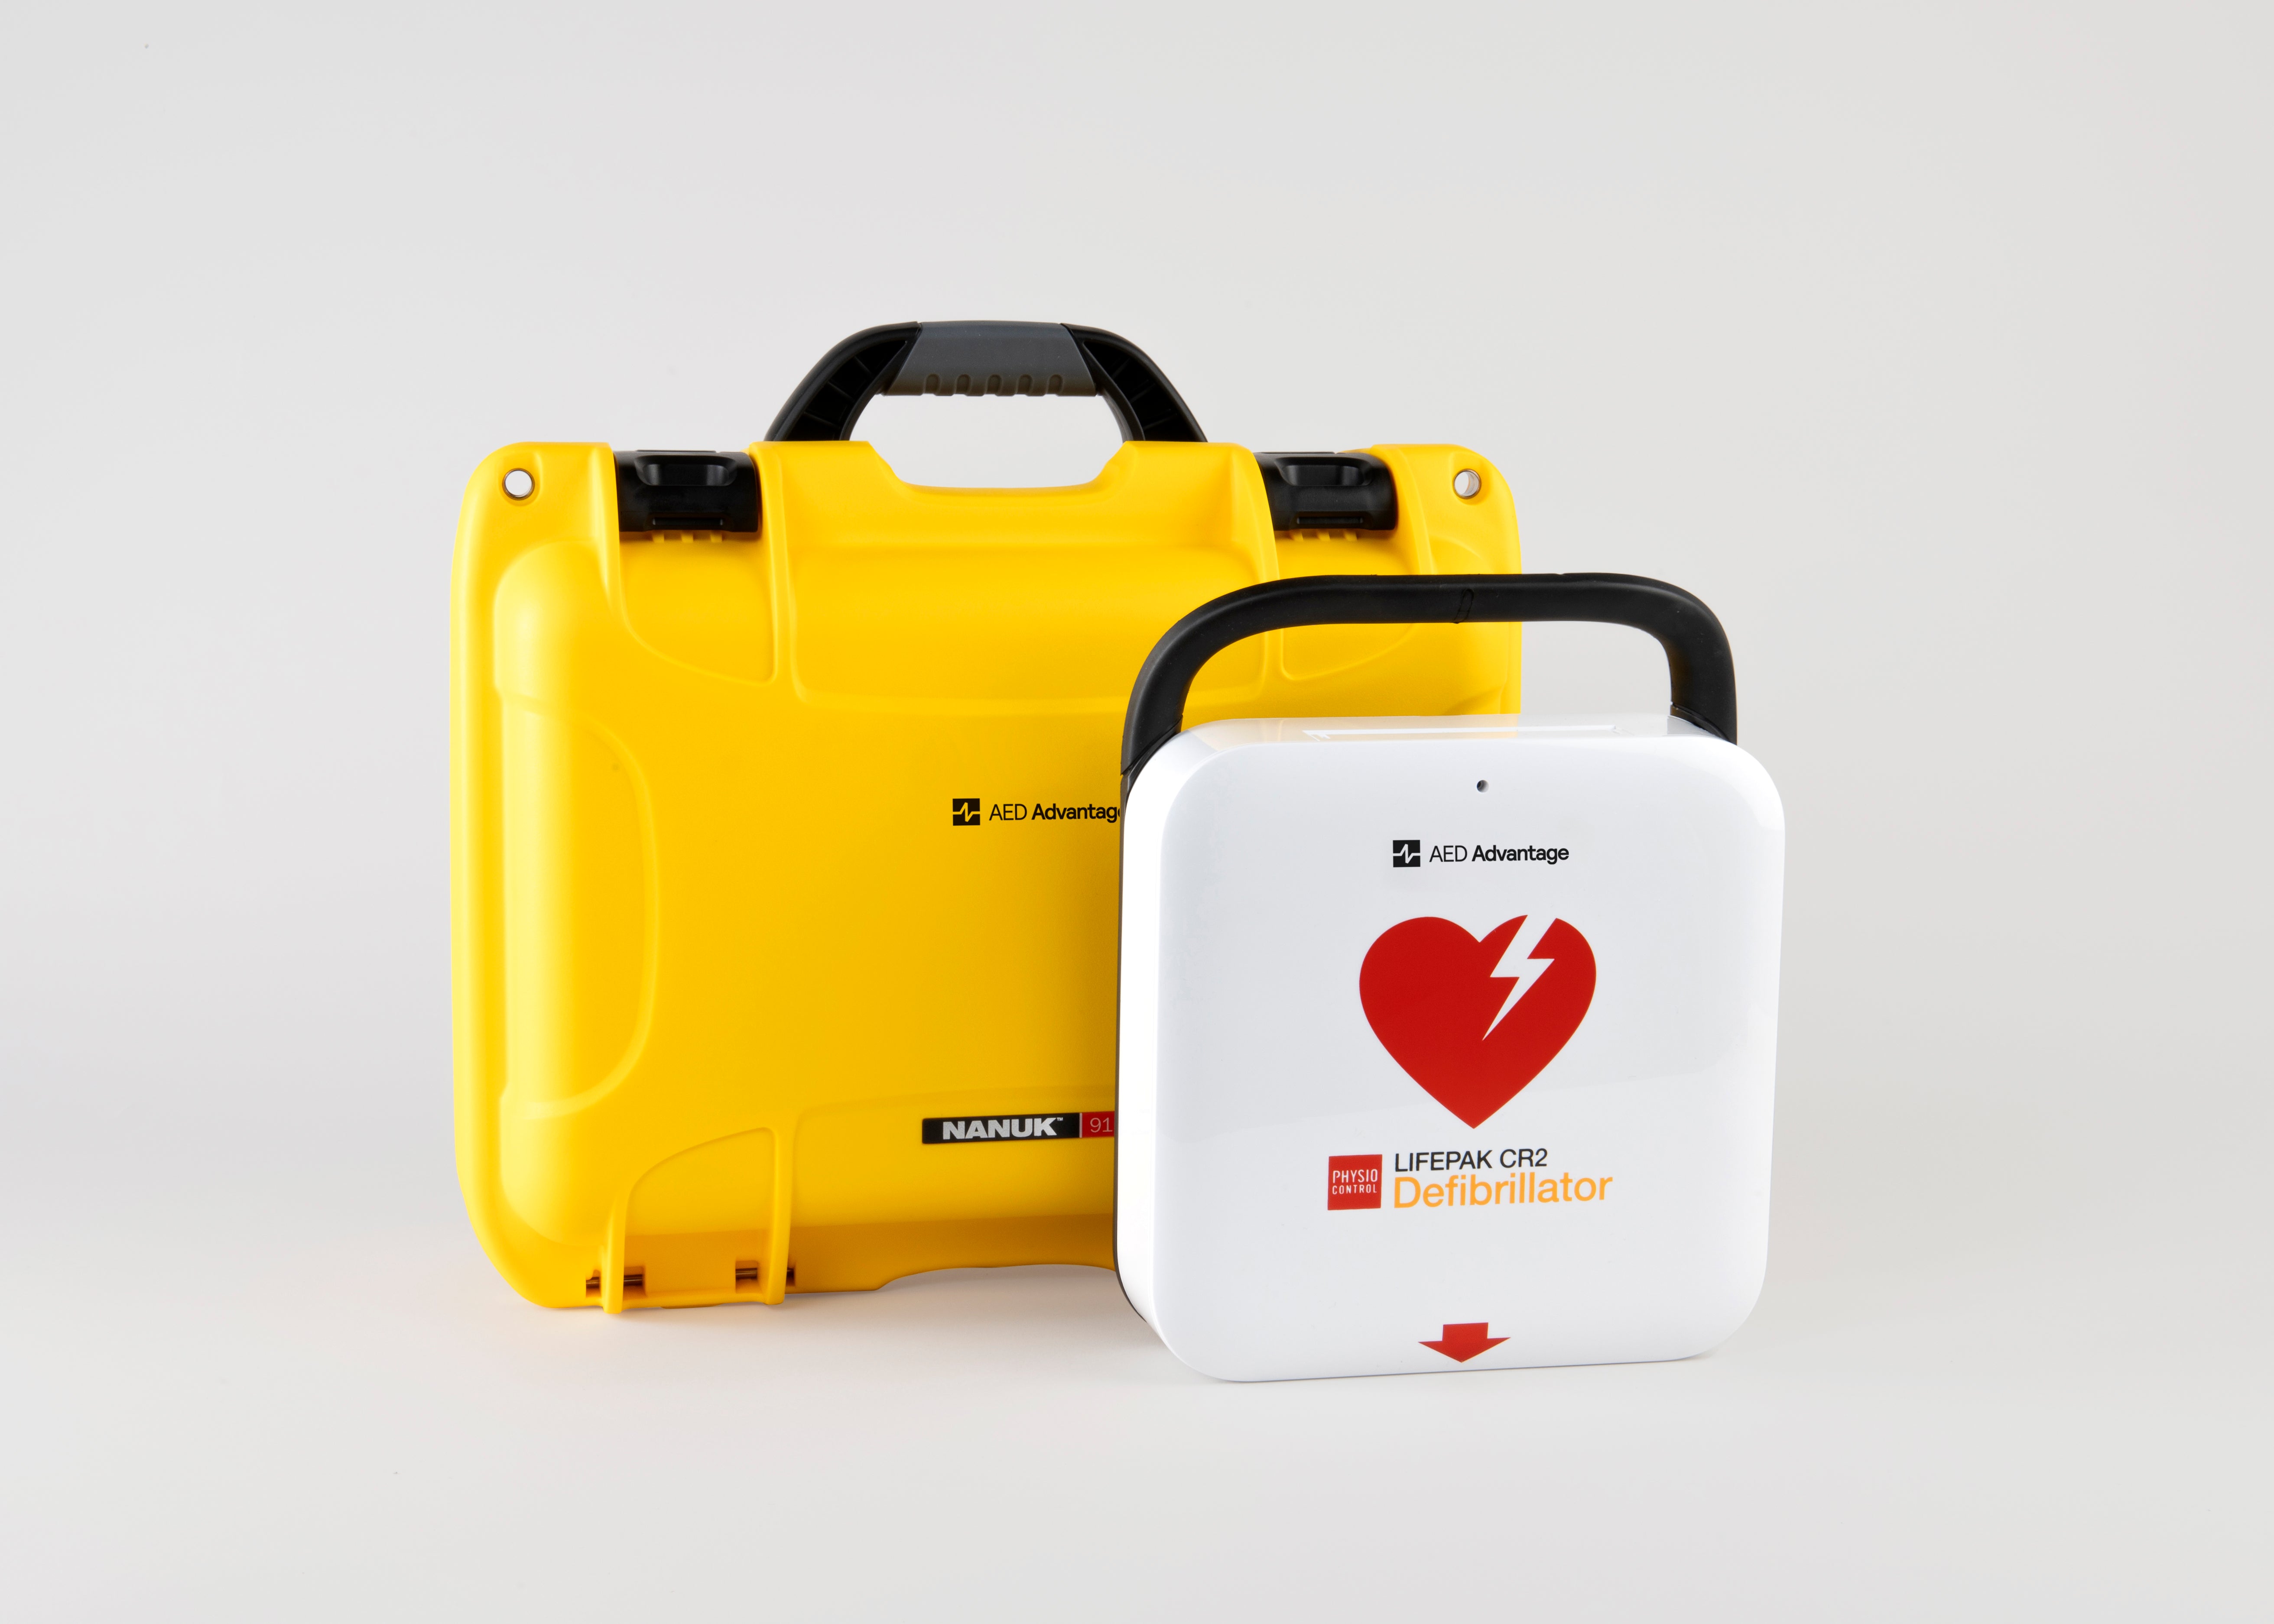 A white and red LIFEPAK CR2 AED machine and a bright yellow hardshell carry case